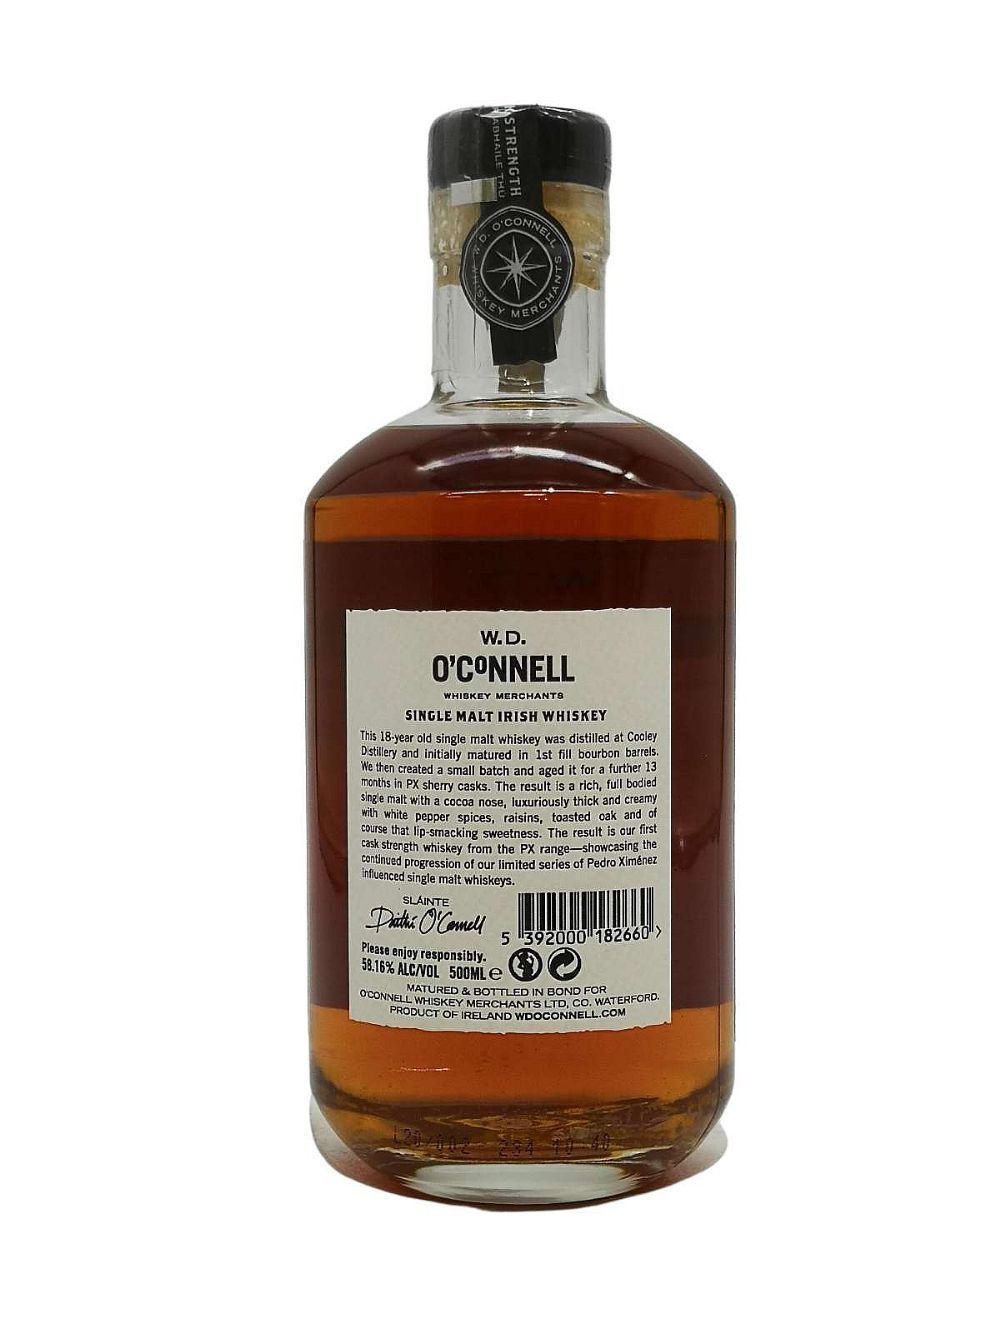 WD O'Connell 18 year old PX Finish